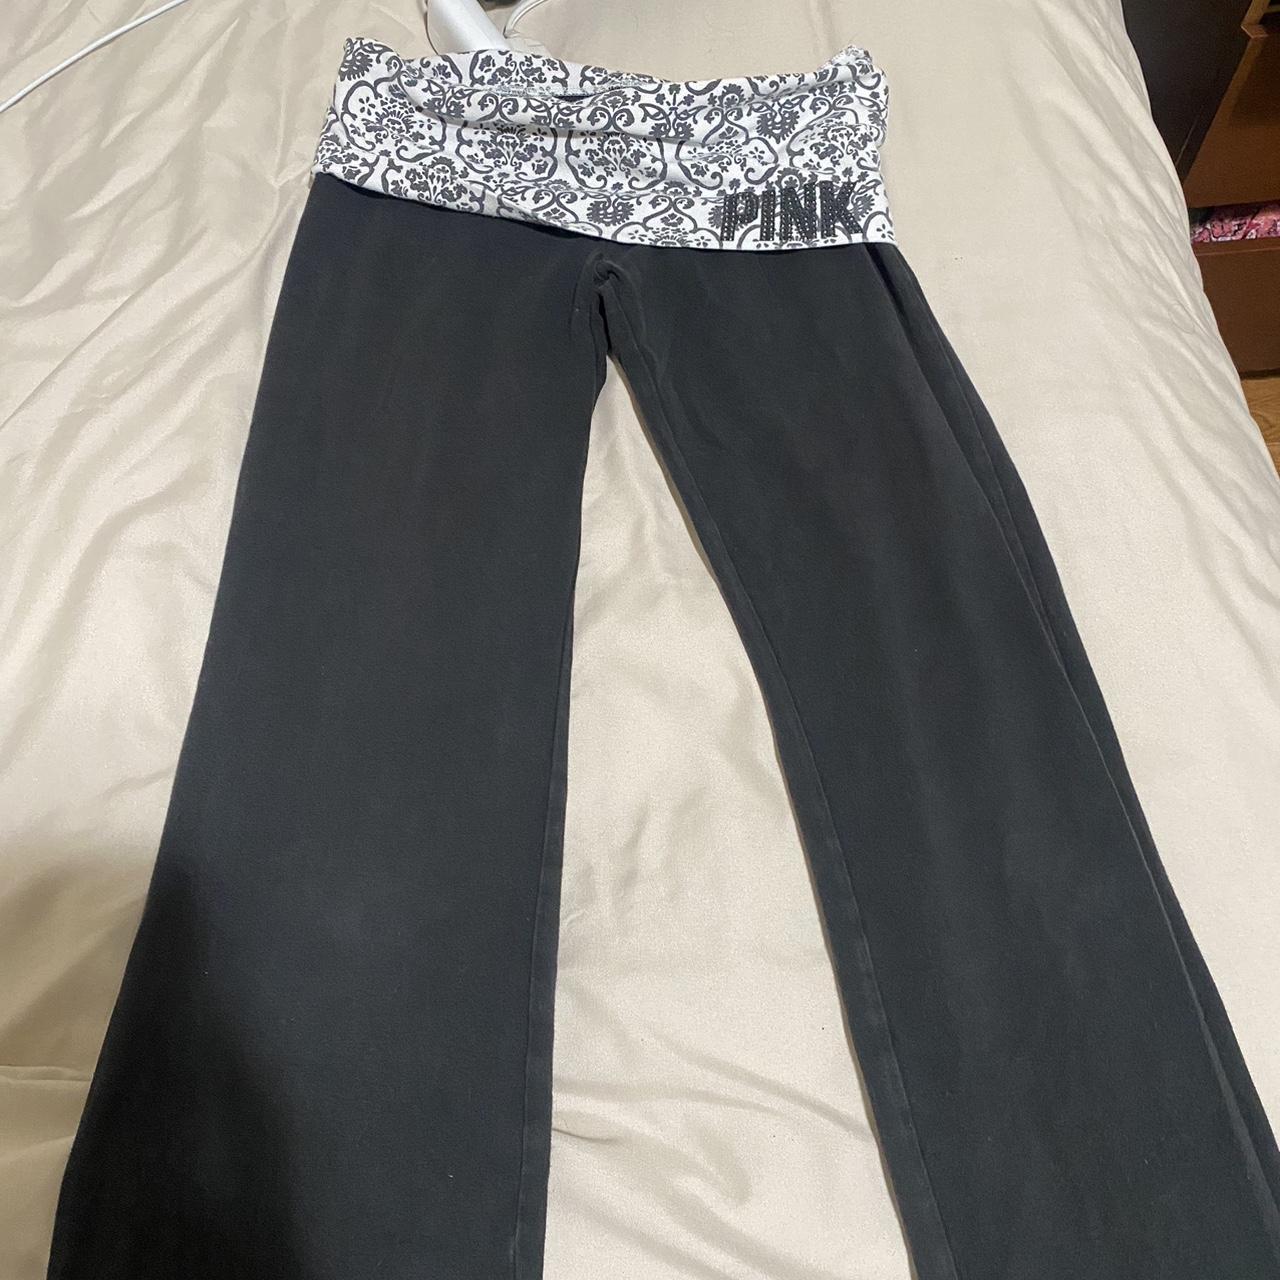 PINK black and white detail flare leggings with... - Depop